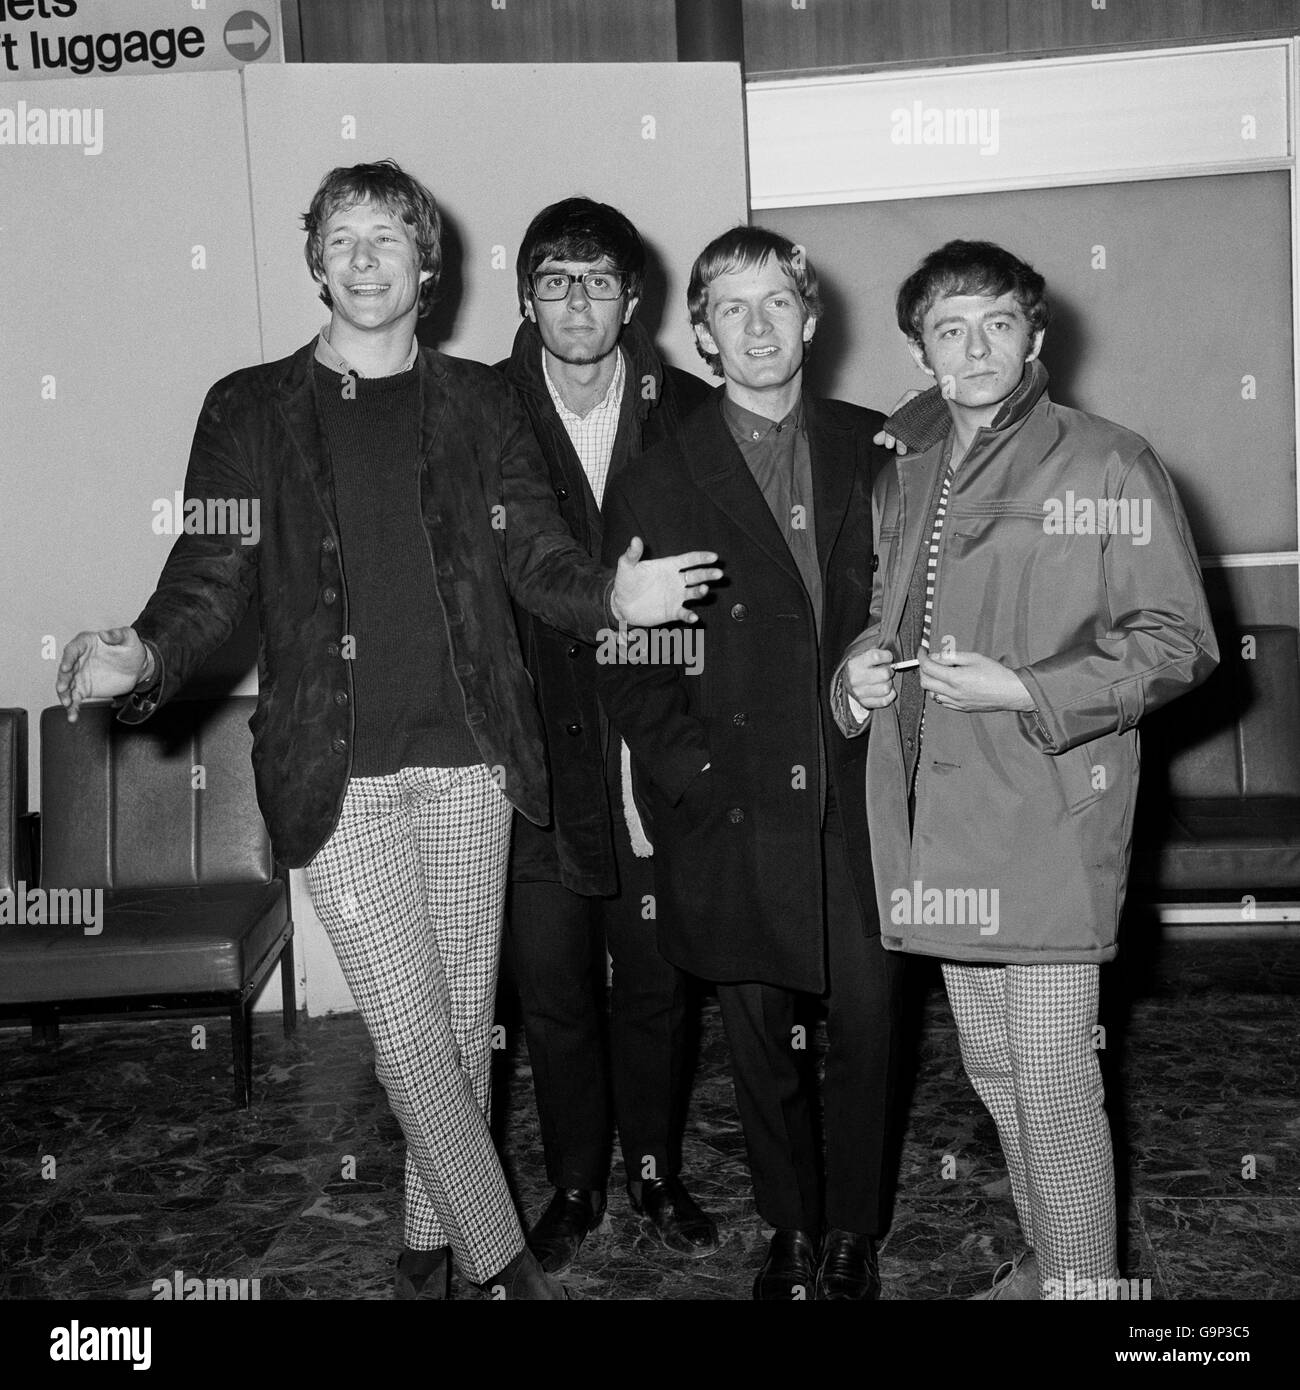 Pop Band Manfred Mann arrive back from a visit to Australia. (l-r) Paul Jones, Manfred Mann, Mike Vickers and Mike Hugg. The fifth band member, Tom McGuinness, was still in customs when the photograph was taken. Stock Photo